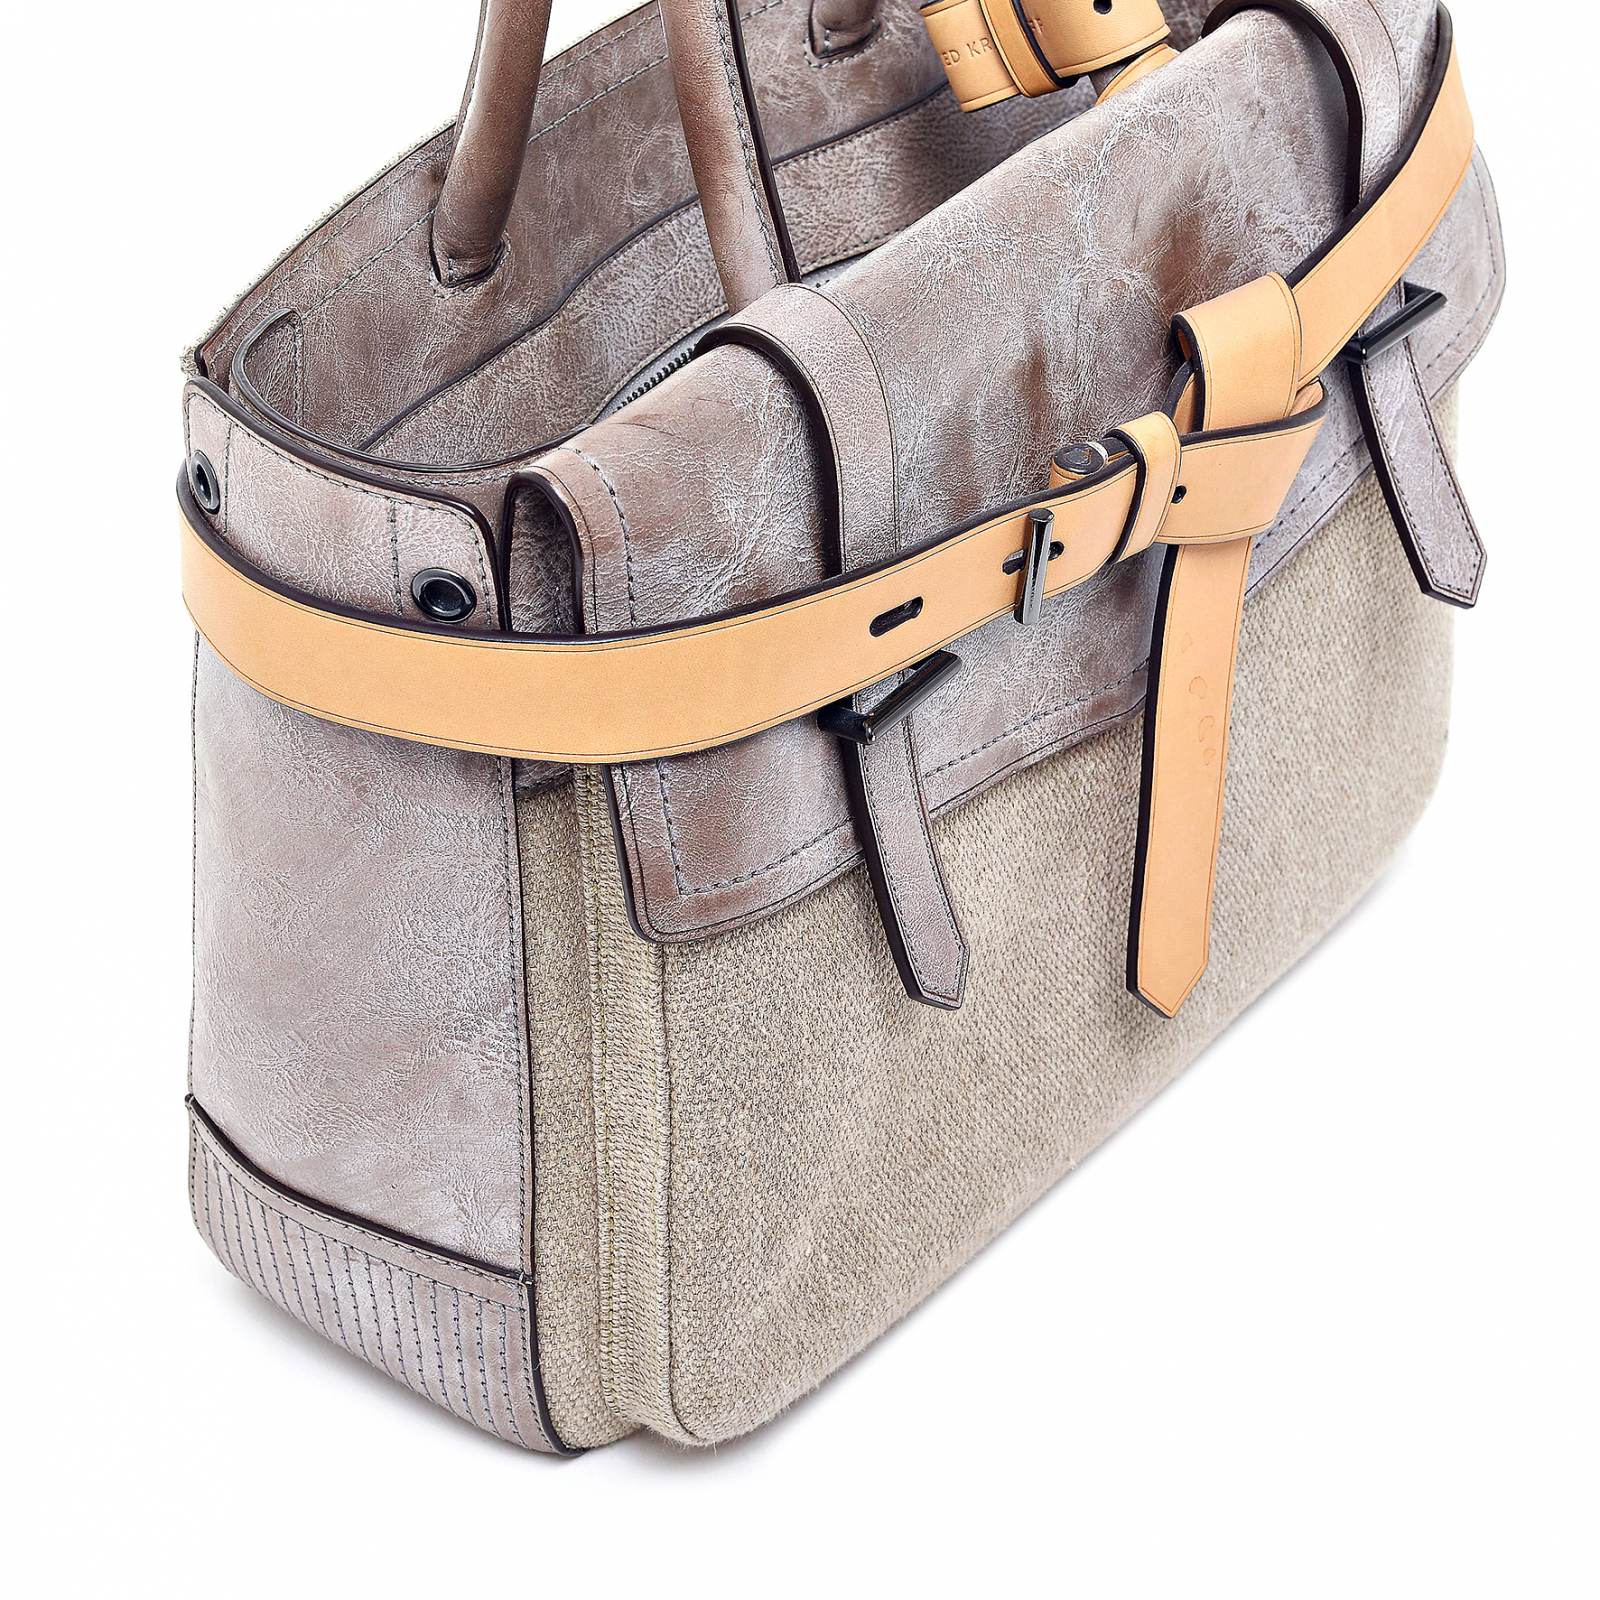 Boxer  leather and linen tote